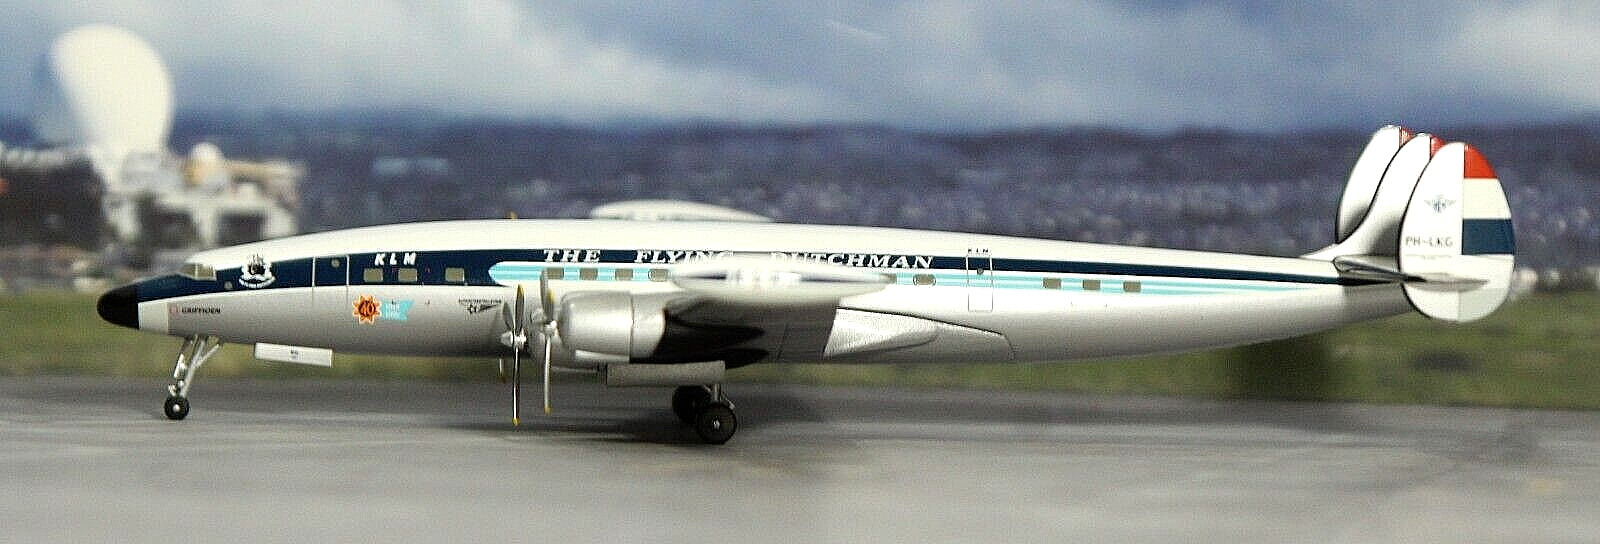 Hogan Wings  Lockheed L1049G Constellation  KLM Airlines  1:200 EXTREMELY RARE